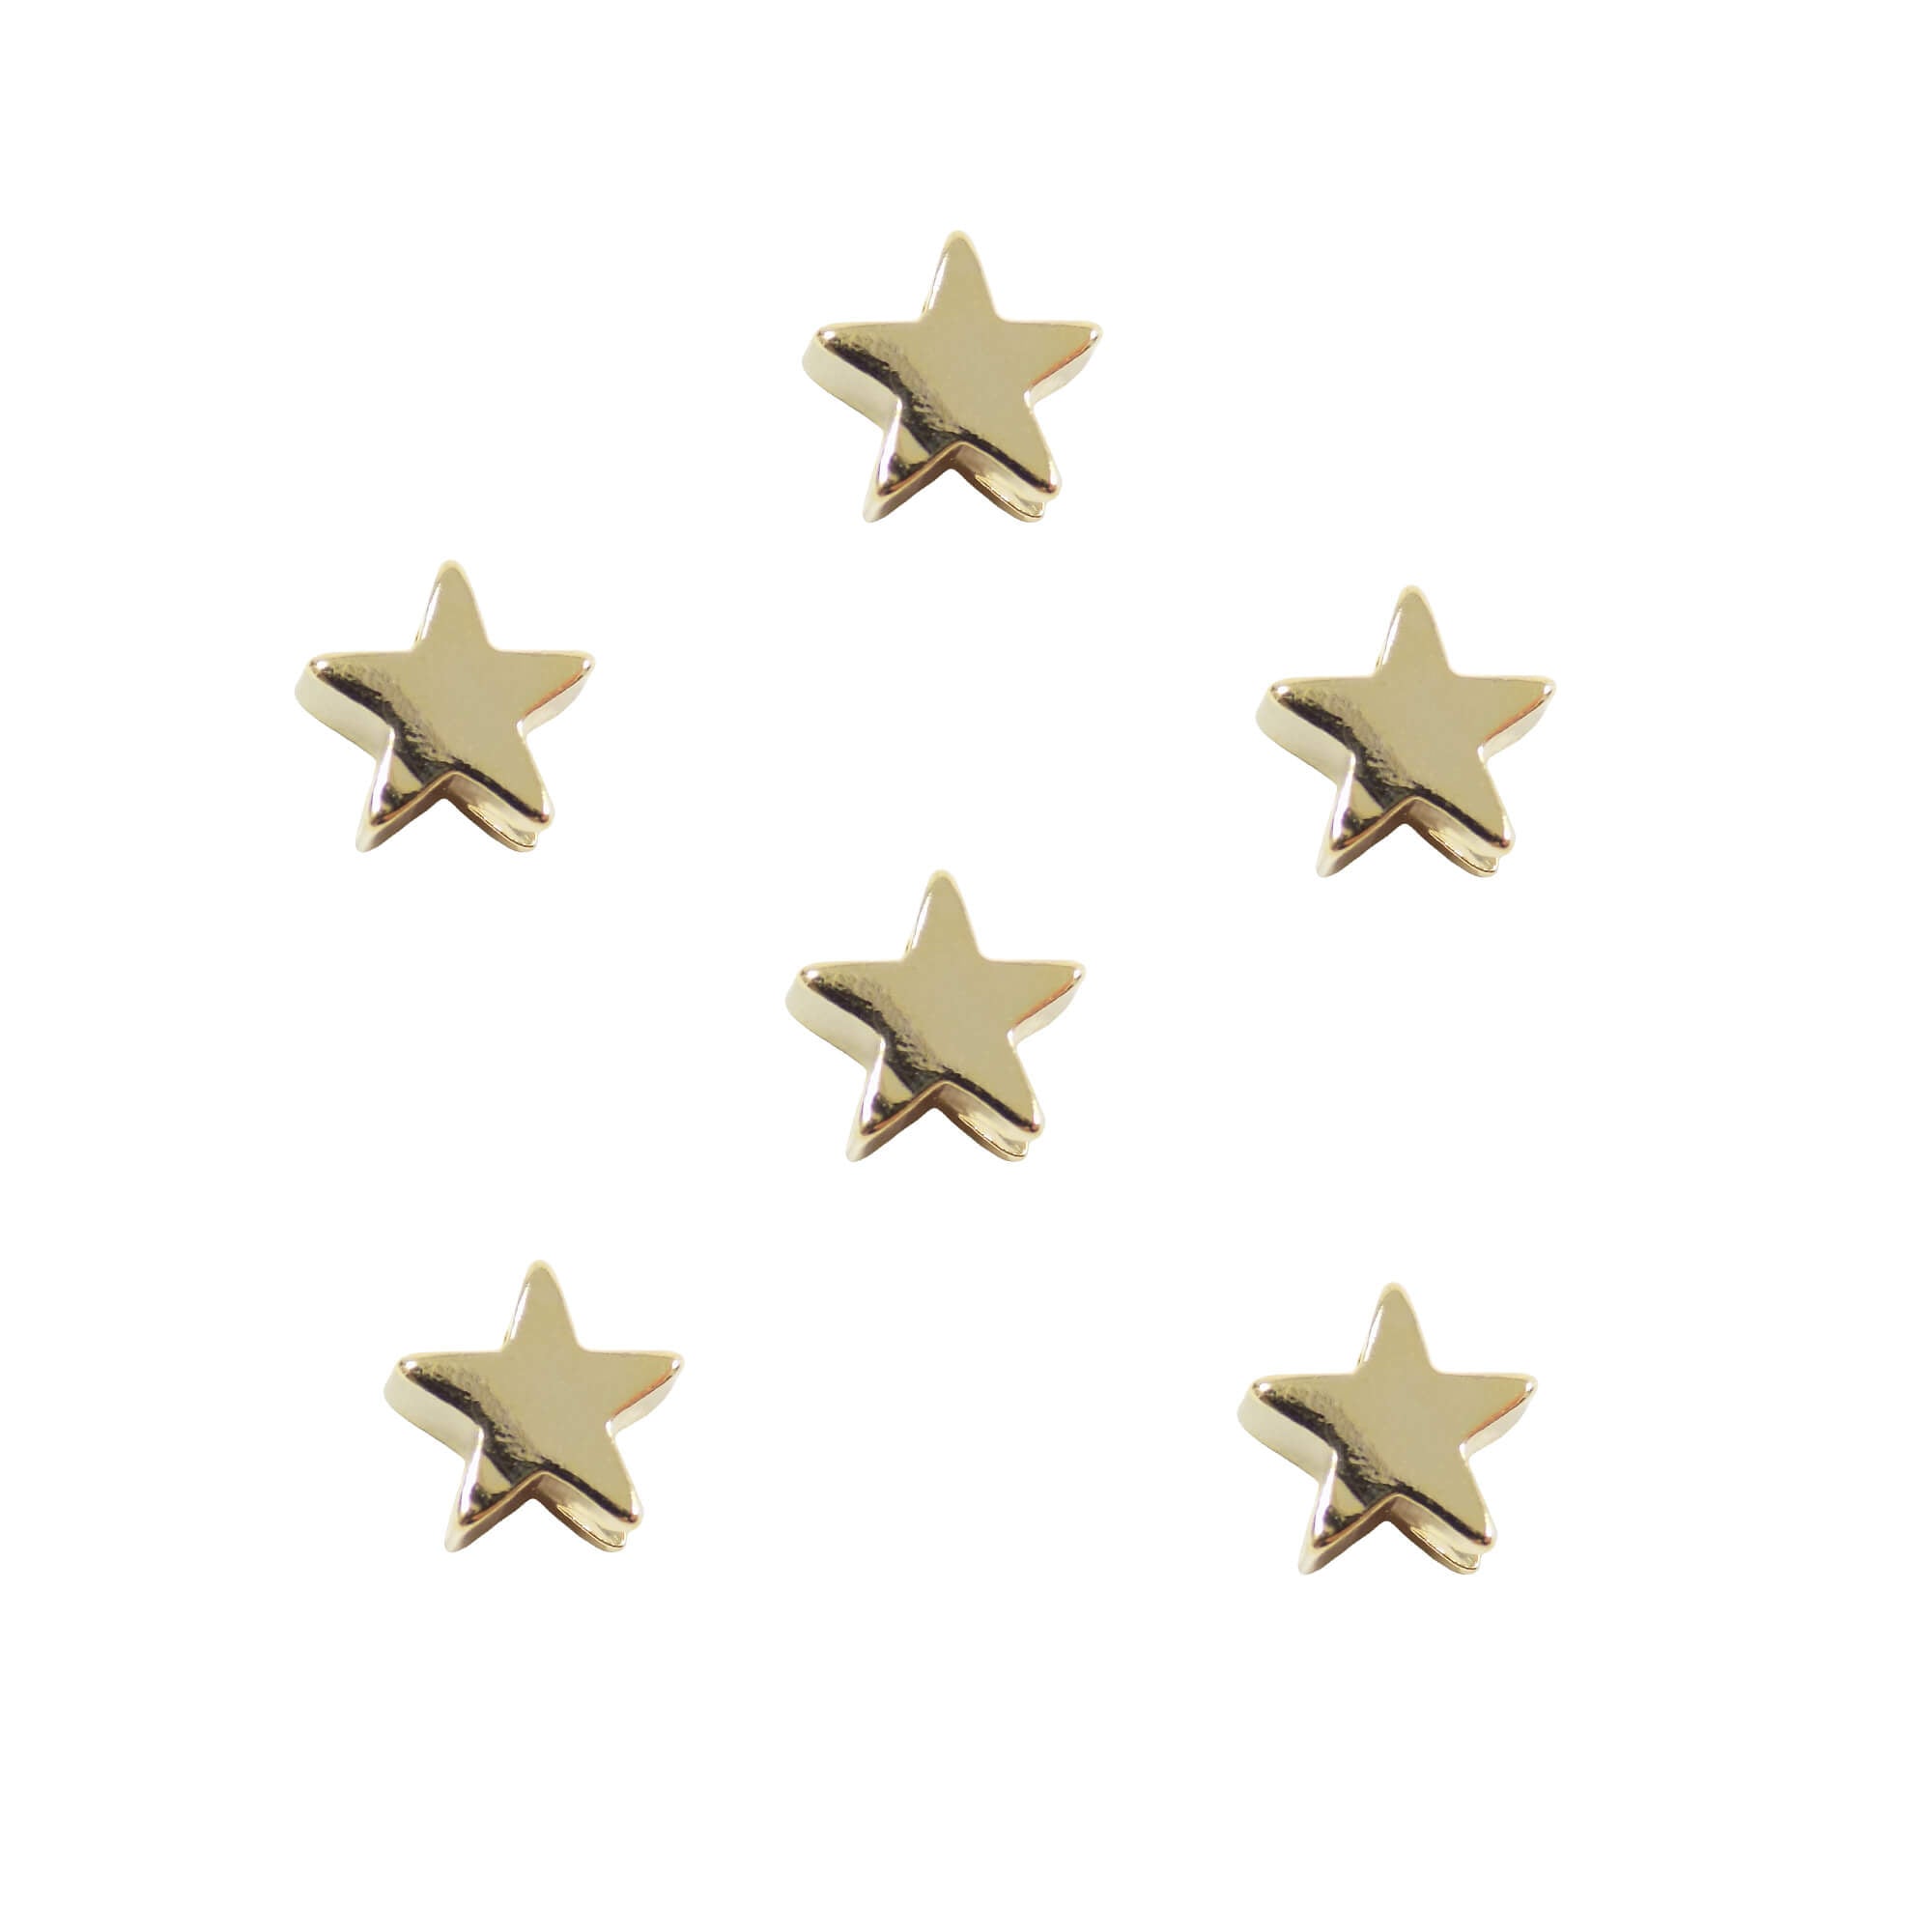 Star Slider Charm (6 pieces) Gold Plated Little Star Spacer Beads